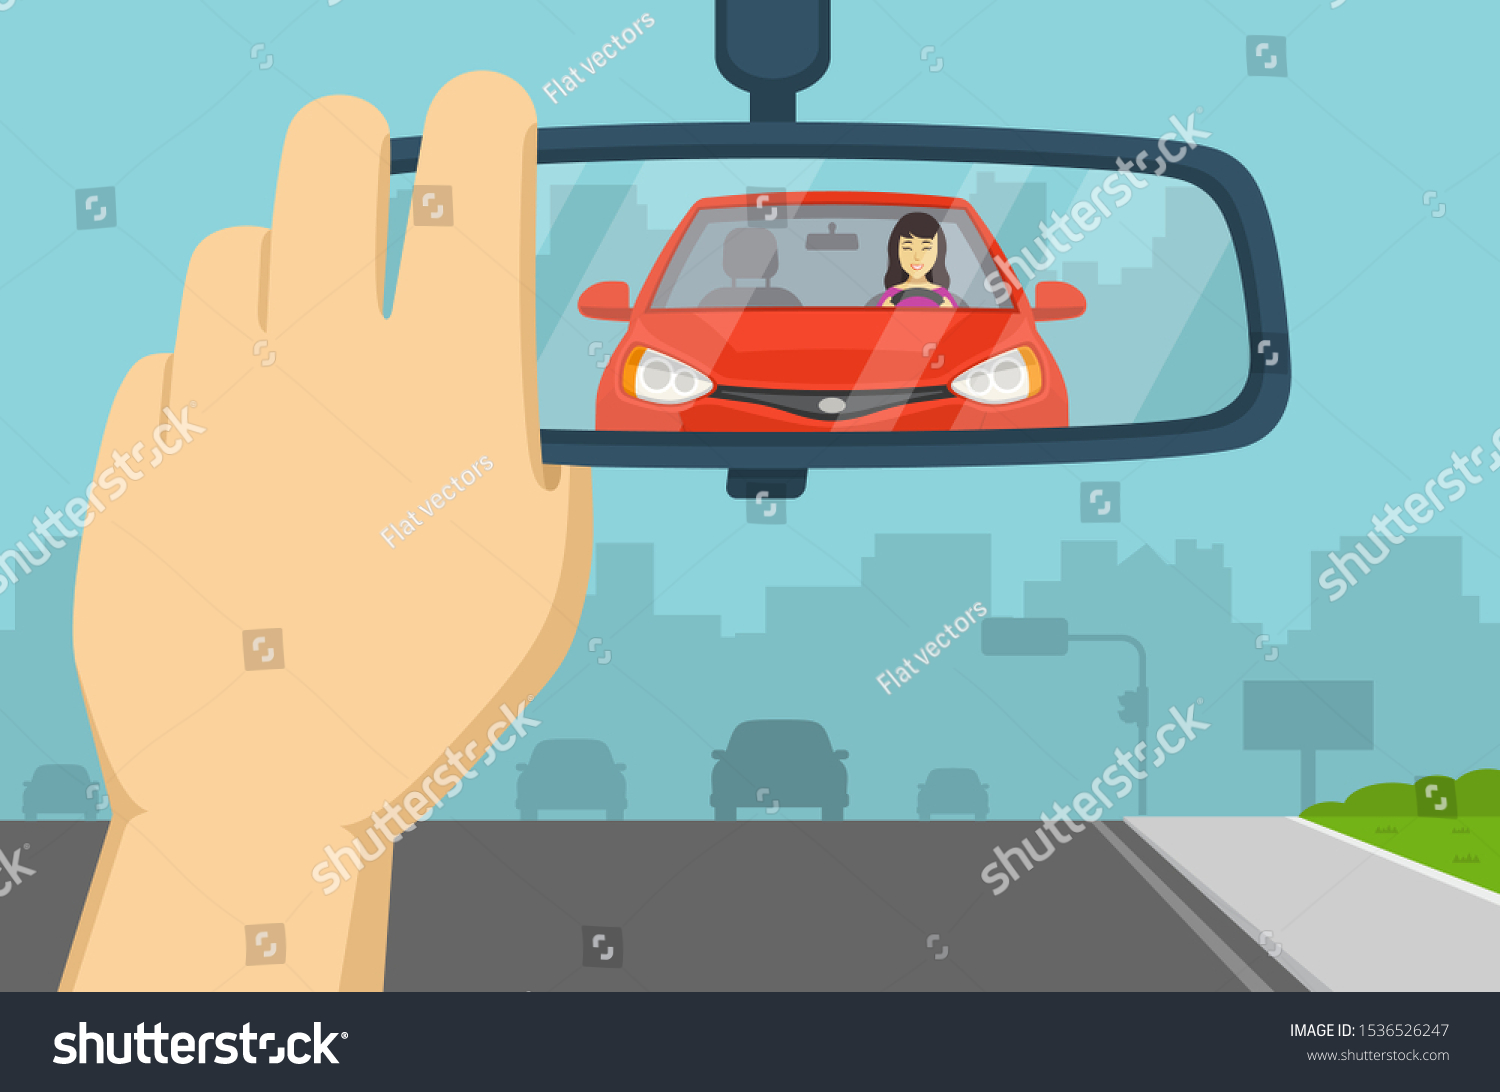 Hand adjusting rear view mirror in a car. Close-up of car rear mirror. Flat vector illustration template. #1536526247